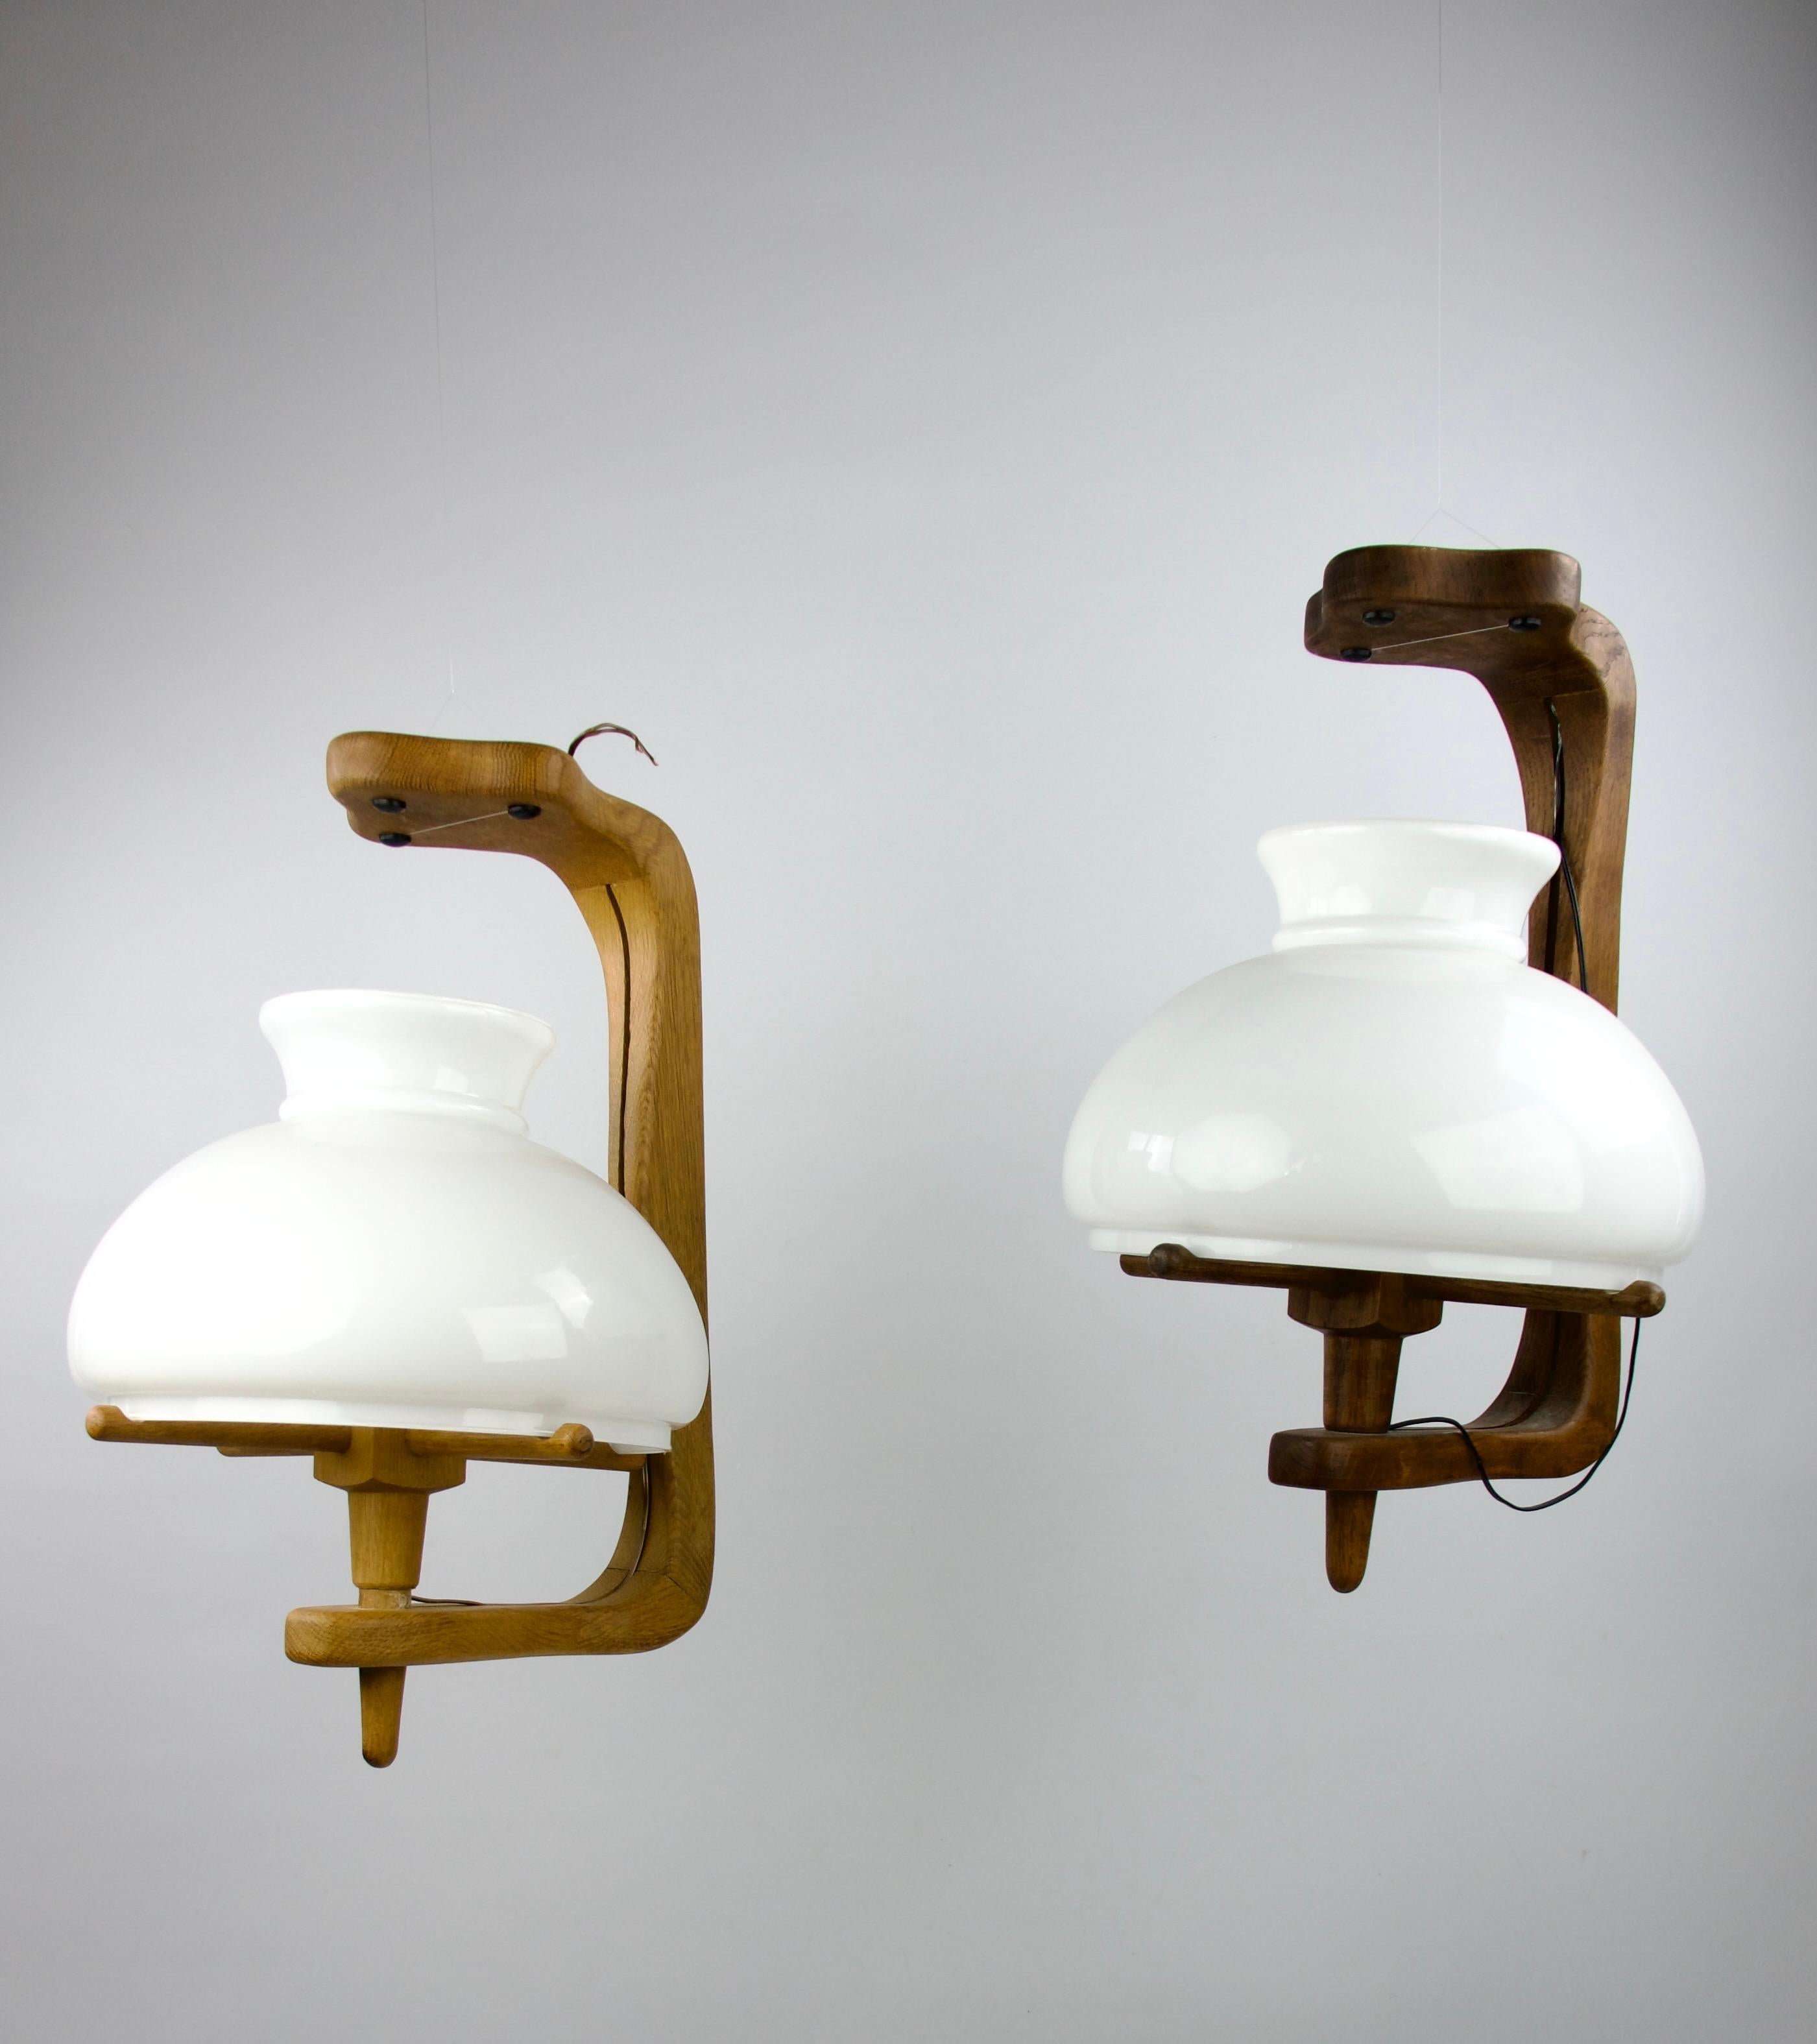 Set of two beautiful Guillerme et Chambron ceiling chandeliers with their opaline lamp shades for the Votre Maison editor. France, 1960s.

Very good condition.

Dimensions in cm ( H x L x l ) : 52.5 x 30 x 36

Secure shipping.